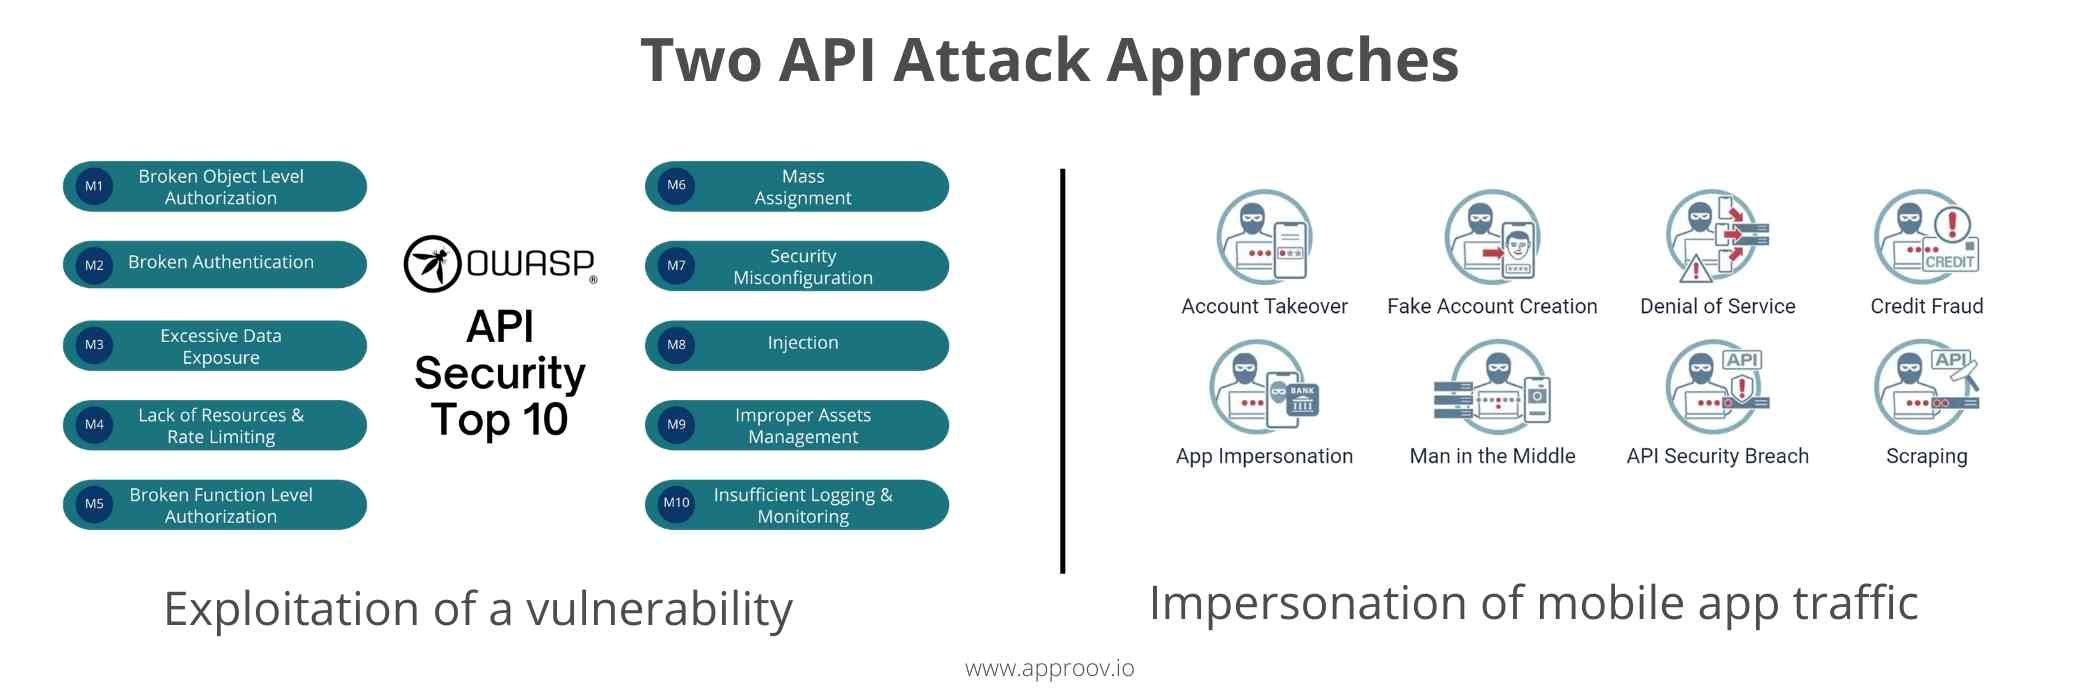 Approov graphic - Two API Attack Approaches 